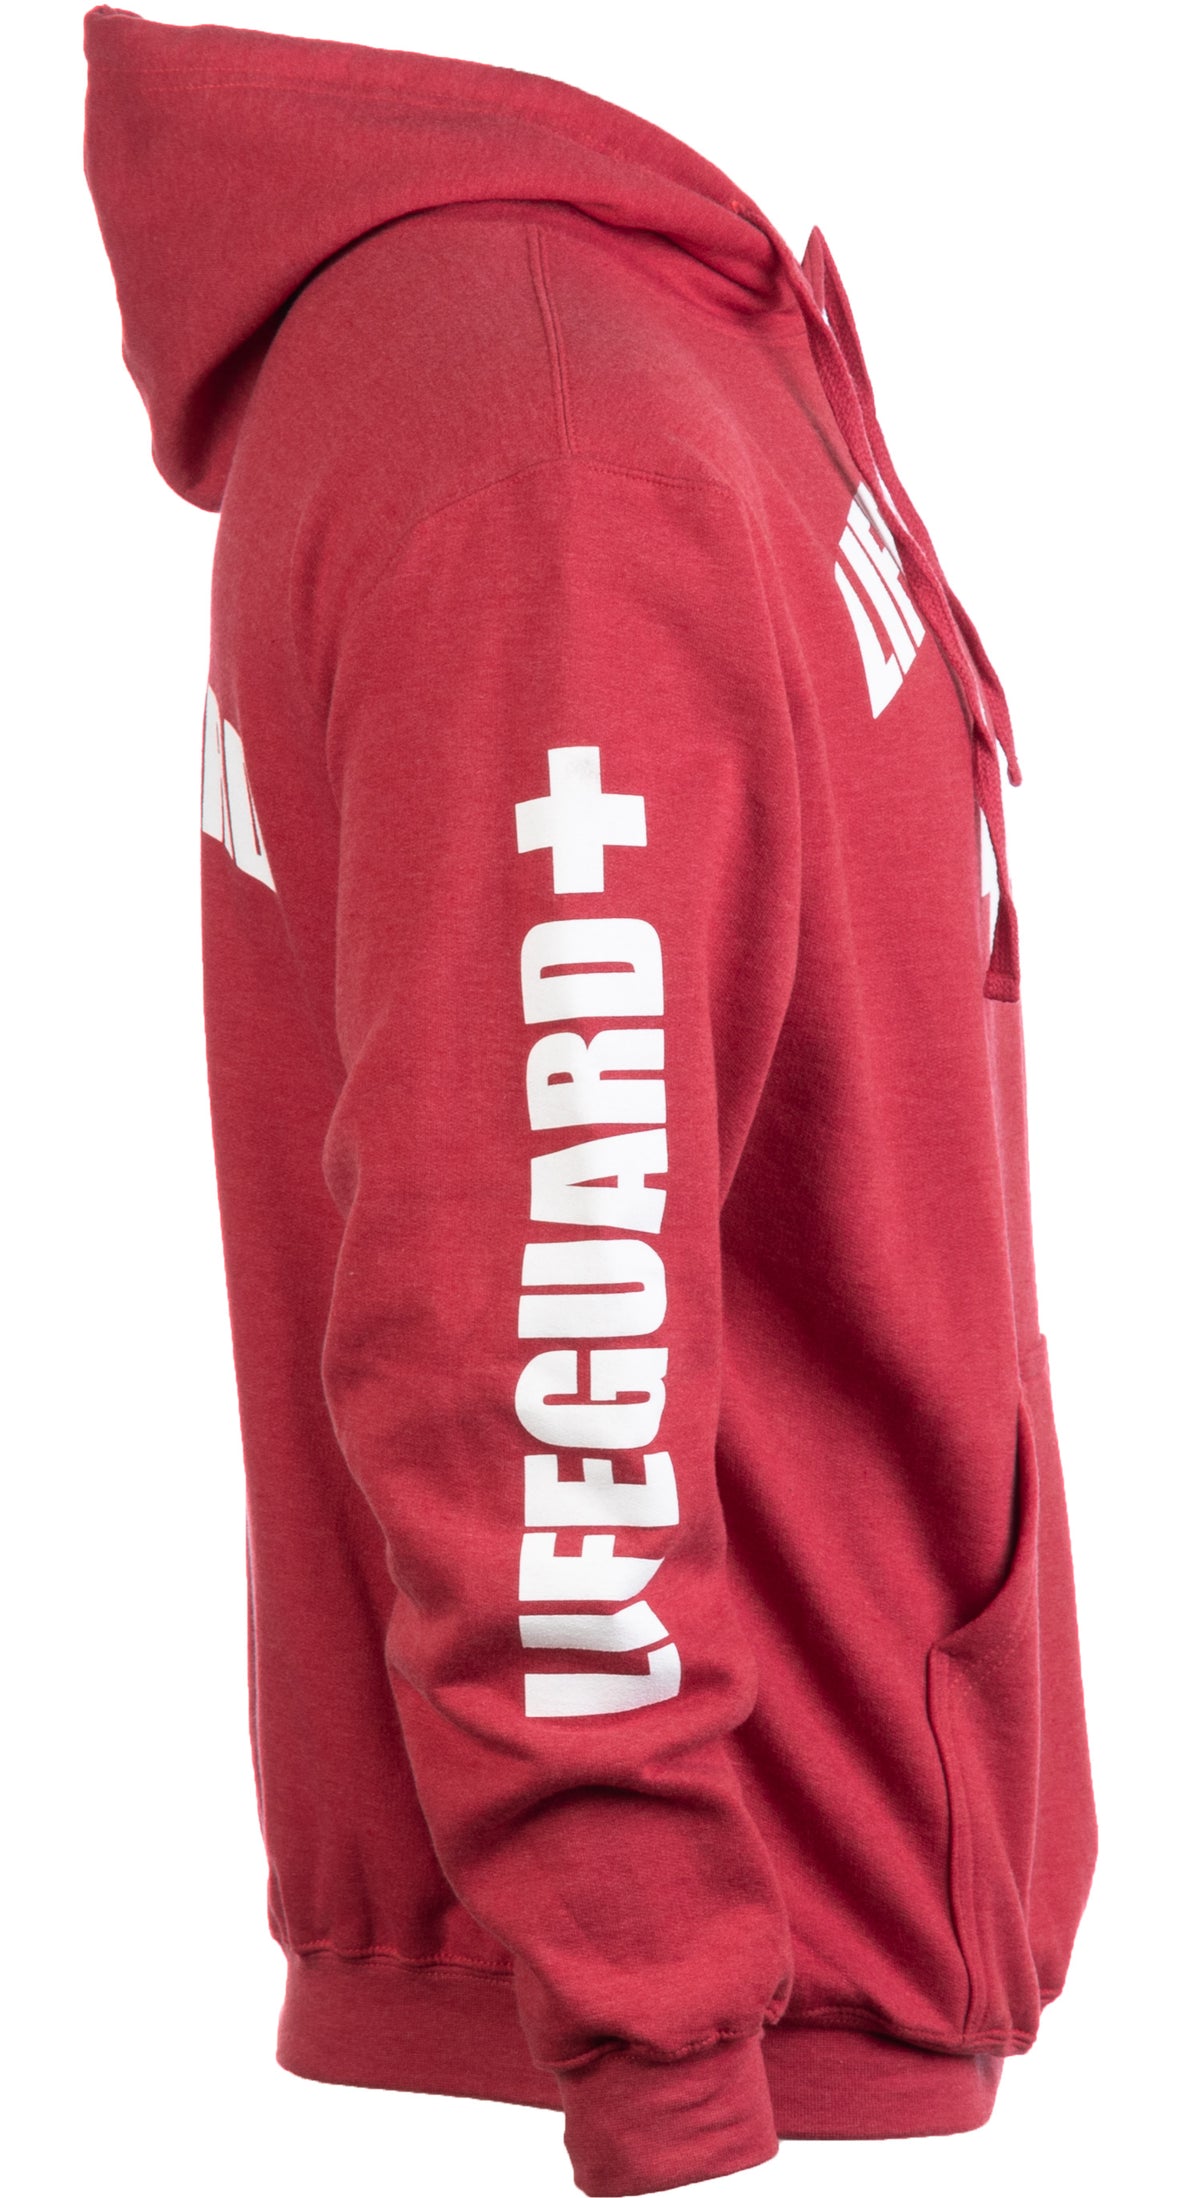 Lifeguard Adult Hooded Sweatshirt (T320) - More Colors Available